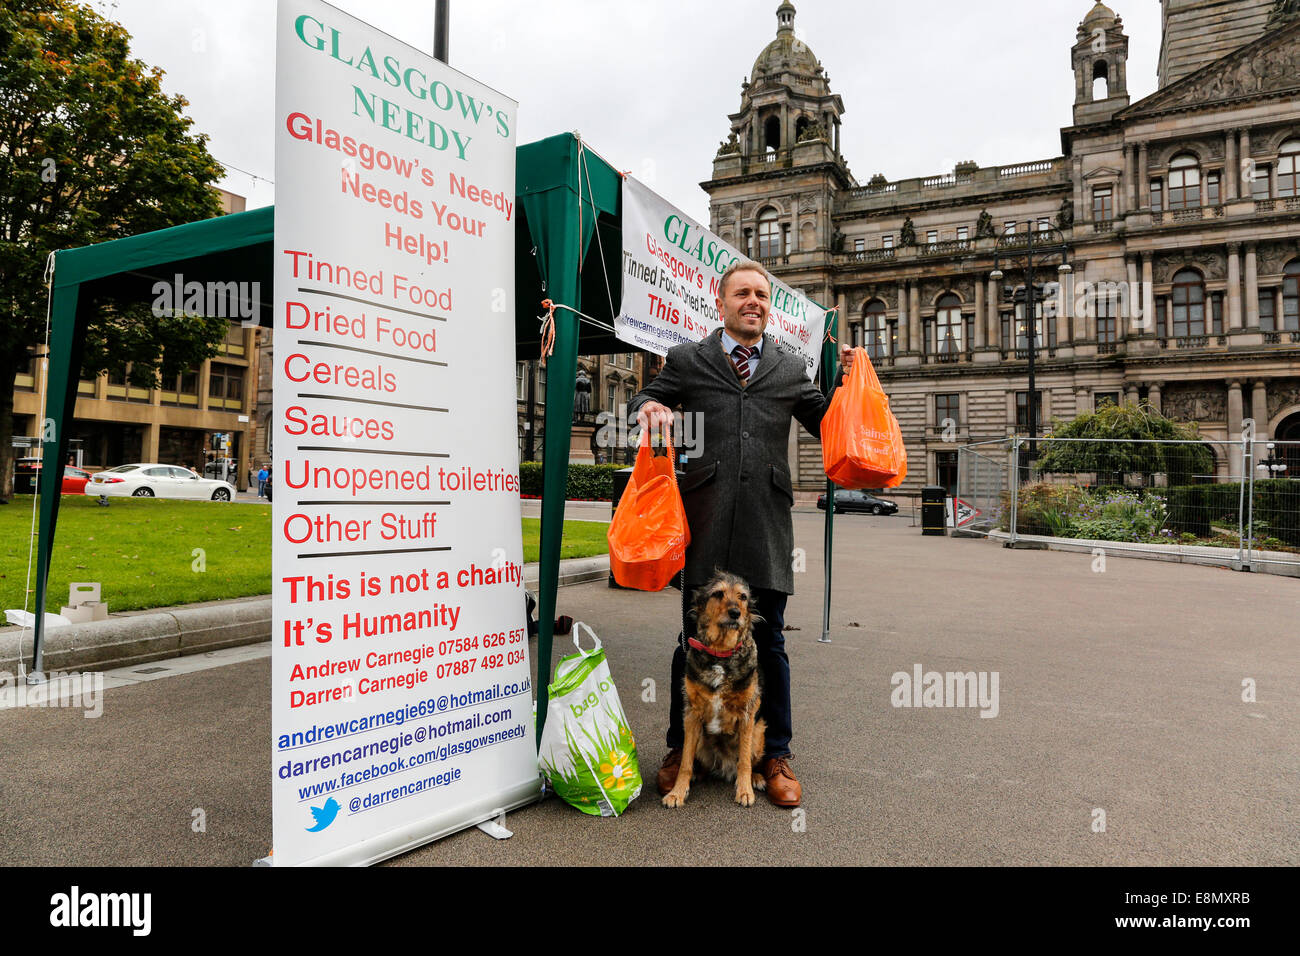 Glasgow, Scotland. 11th Oct, 2014. Andrew Carnegie, aged 45, from Tollcross in Glasgow, who set up the Foodbank charity 'Glasgow's Needy' set up a stall in George Square, Glasgow city centre, outside the City Chambers, with the intention of collecting contributions and also drawing attention to social inequality and the needs of the poor. Several passers- by contributed to his charity by handing in bags of food, including Colin Boyd, aged 38. Company Director from Kilwinning. Credit:  Findlay/Alamy Live News Stock Photo